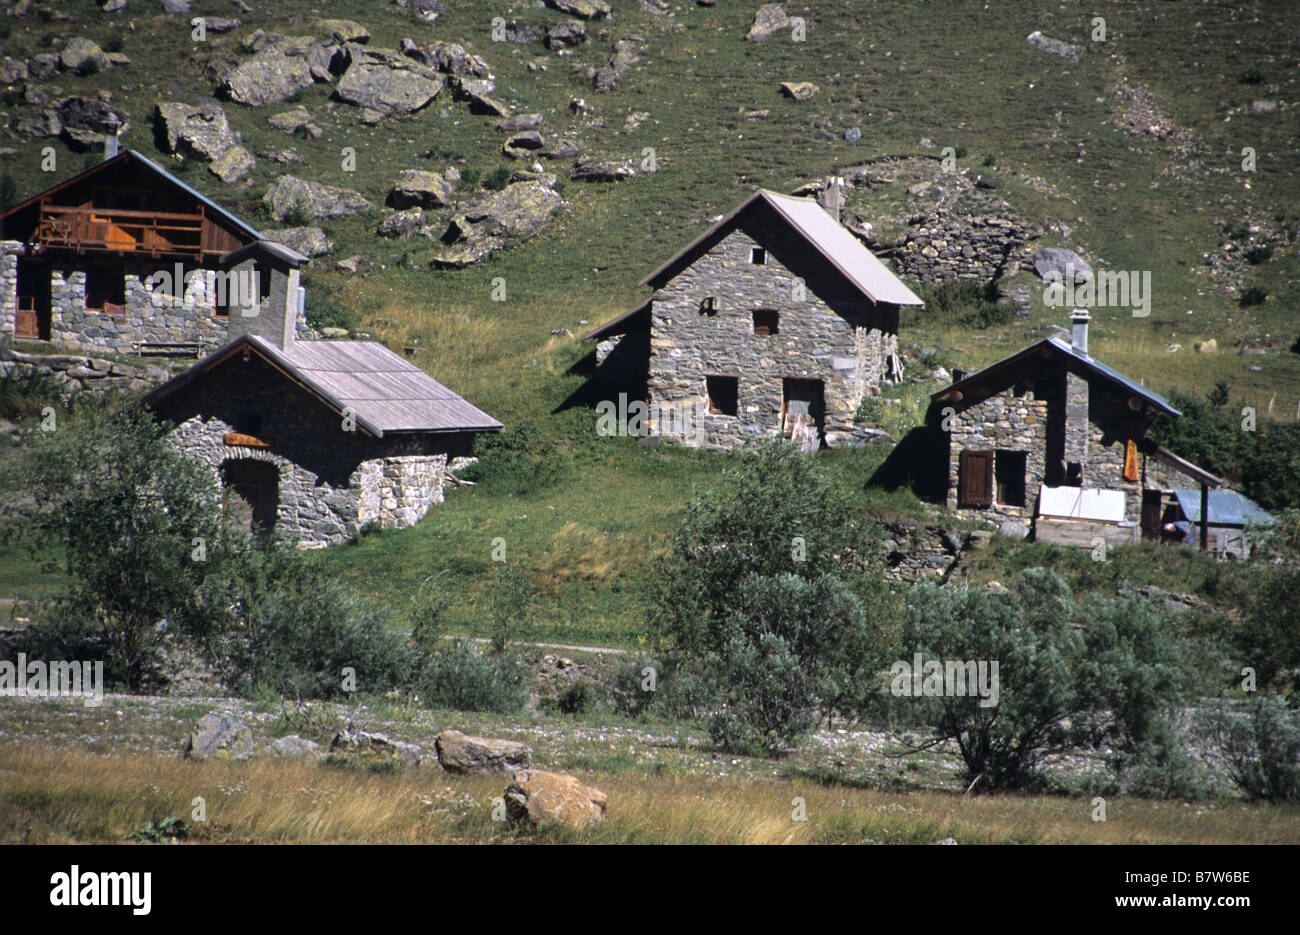 Stone-built Chambran Chalets on Upper Pasture of La Vallouise, Ecrins National Park, French Alps, France Stock Photo